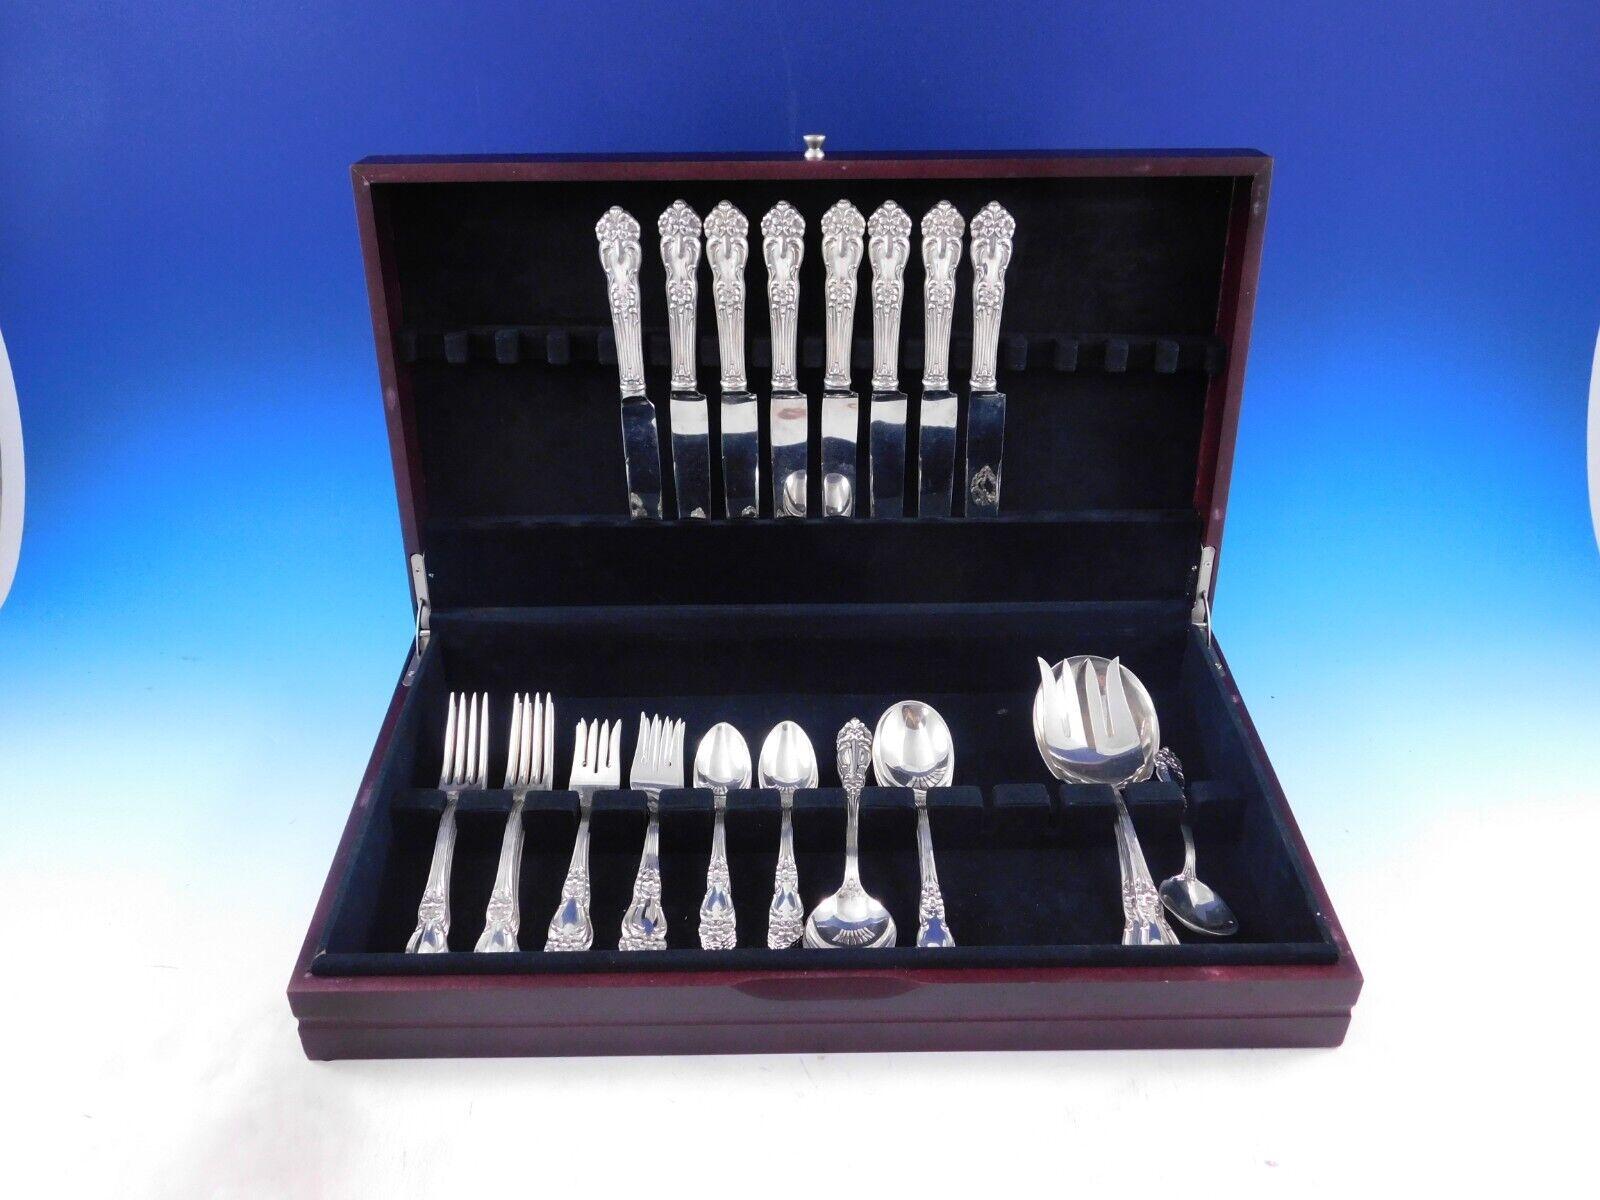 Gorgeous Dinner Size Amaryllisby Reed & Barton sterling silver Flatware set, 43 pieces. This set includes:

8 Dinner Size Knives, 9 5/8